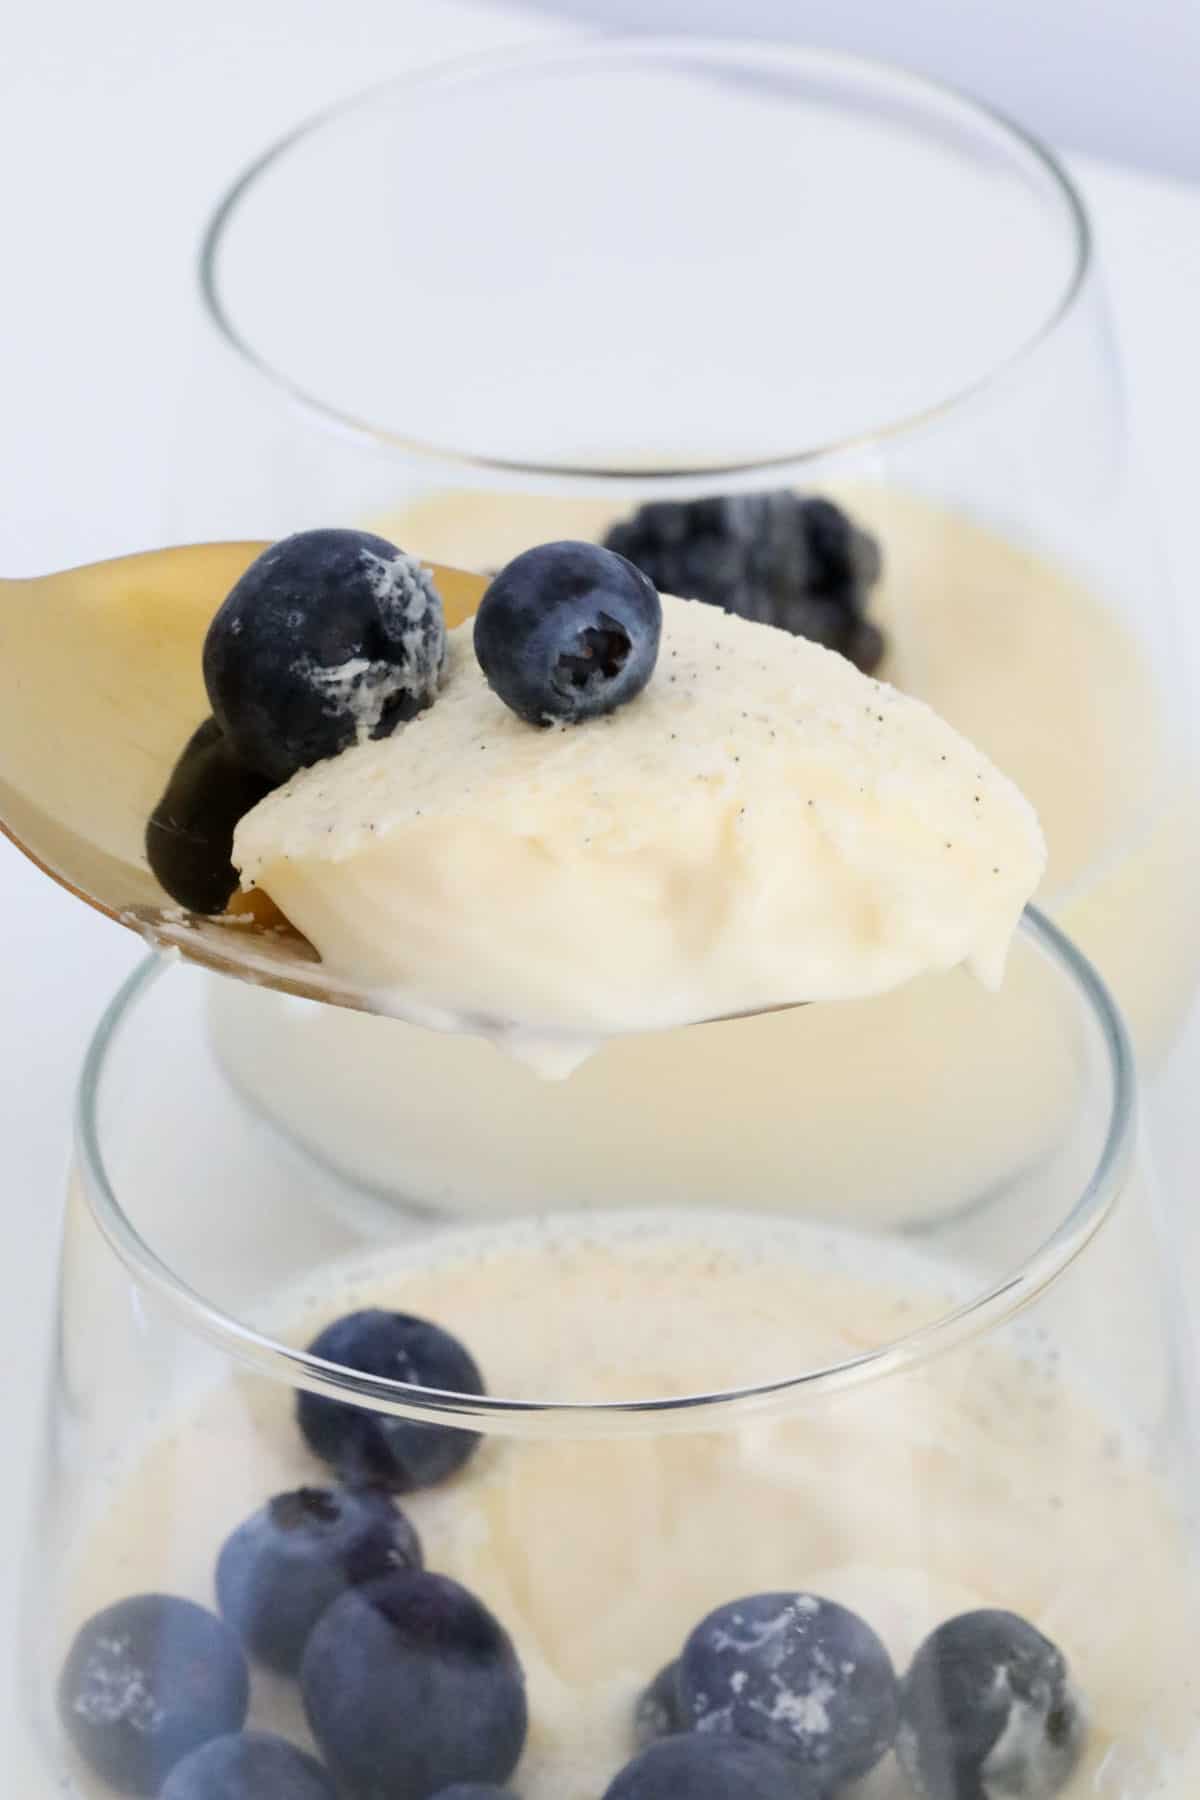 A spoonful of panna cotta and blueberries.